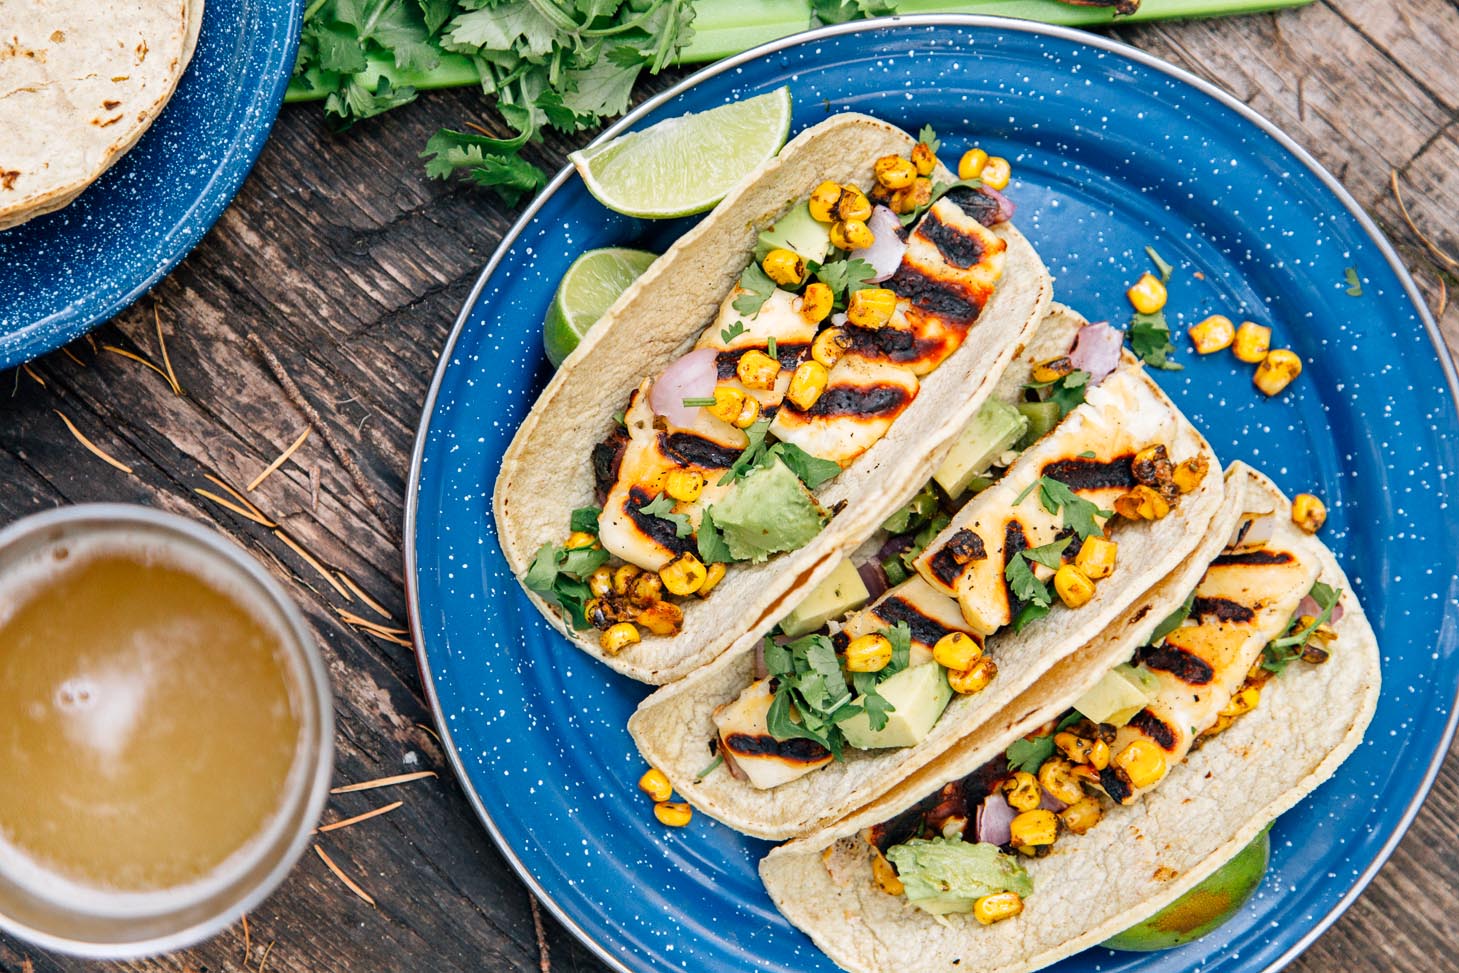 These Grilled Halloumi Tacos are a great vegetarian camping meal. Easy to prepare and even easier to clean up, this is simple camping food at it's best!